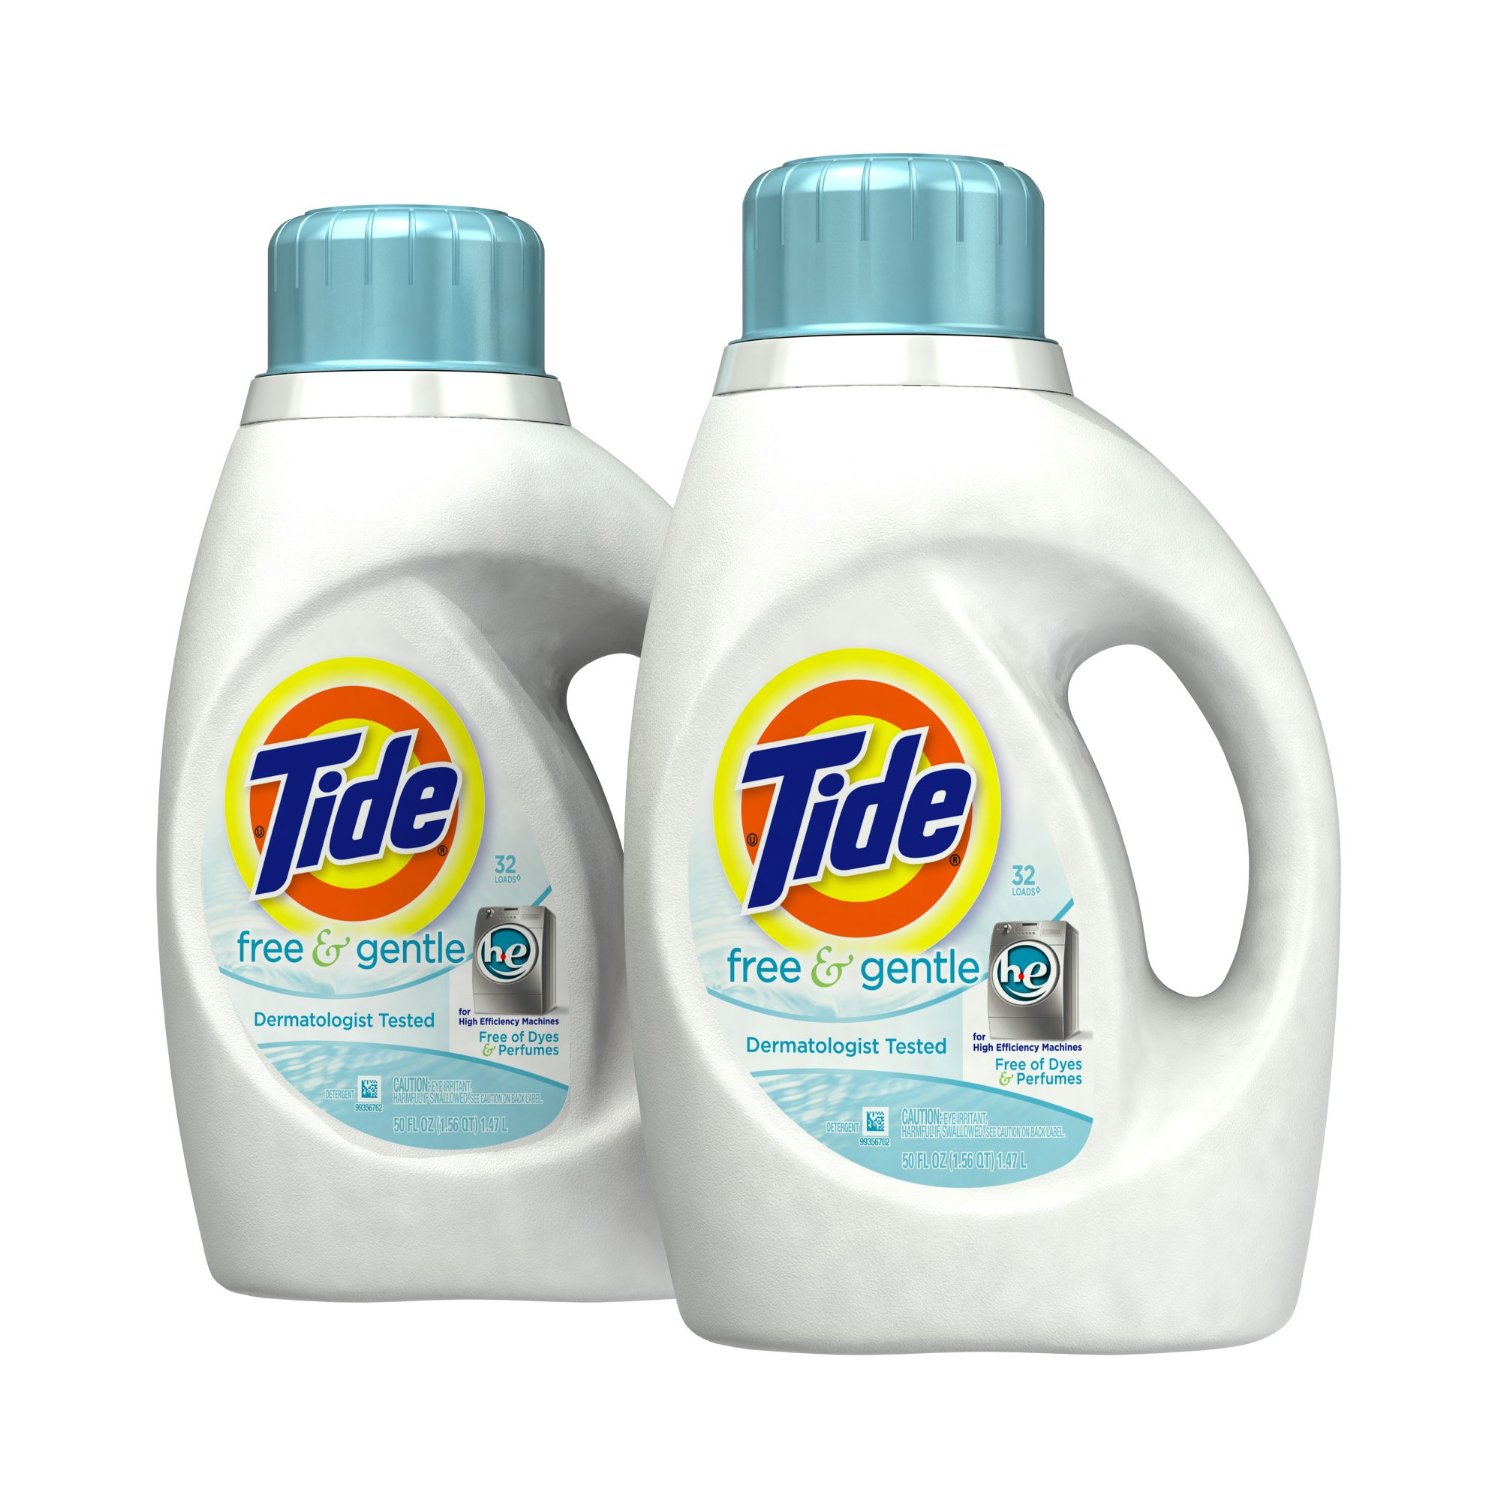 Tide Laundry Detergent, 50 Ounce (Pack of 2) $8.97+free shipping